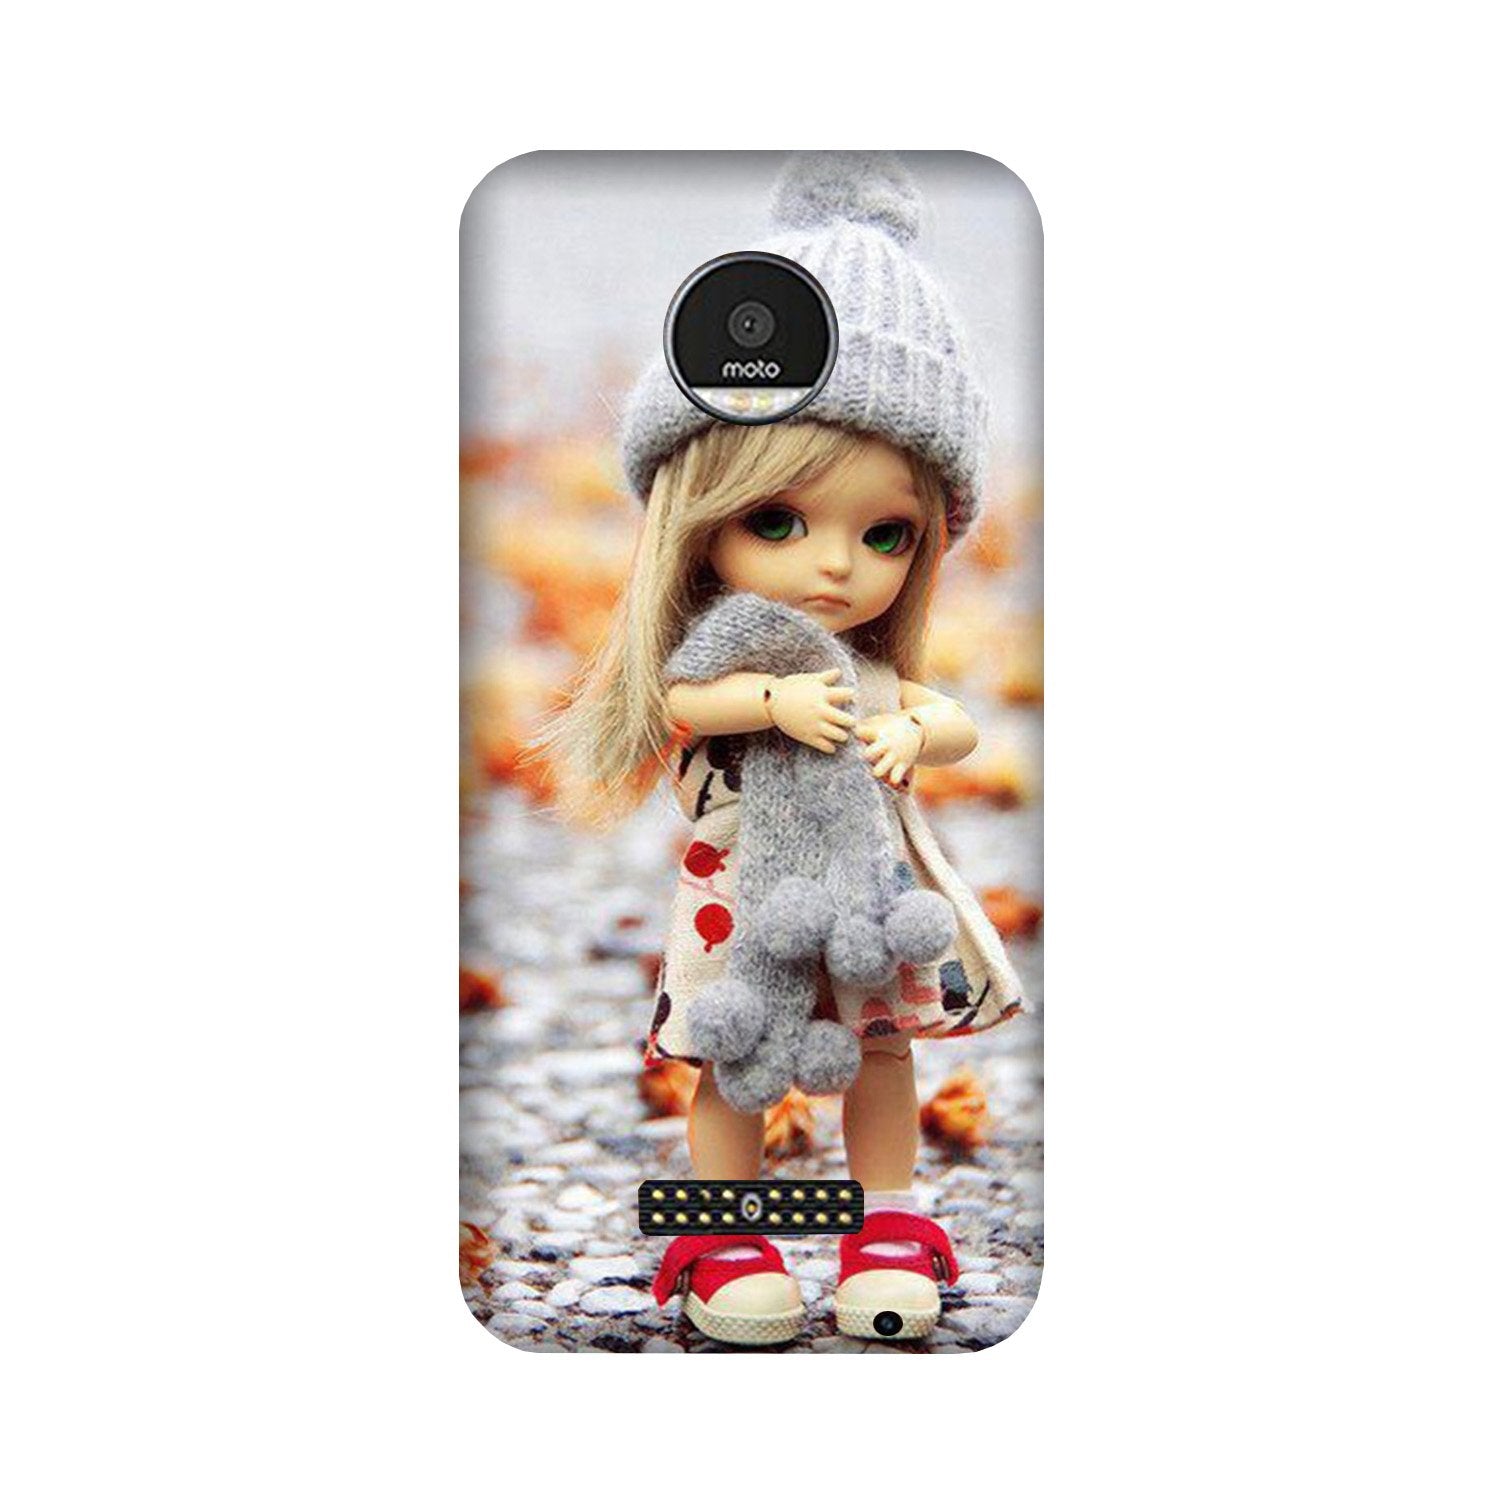 Cute Doll Case for Moto Z Play